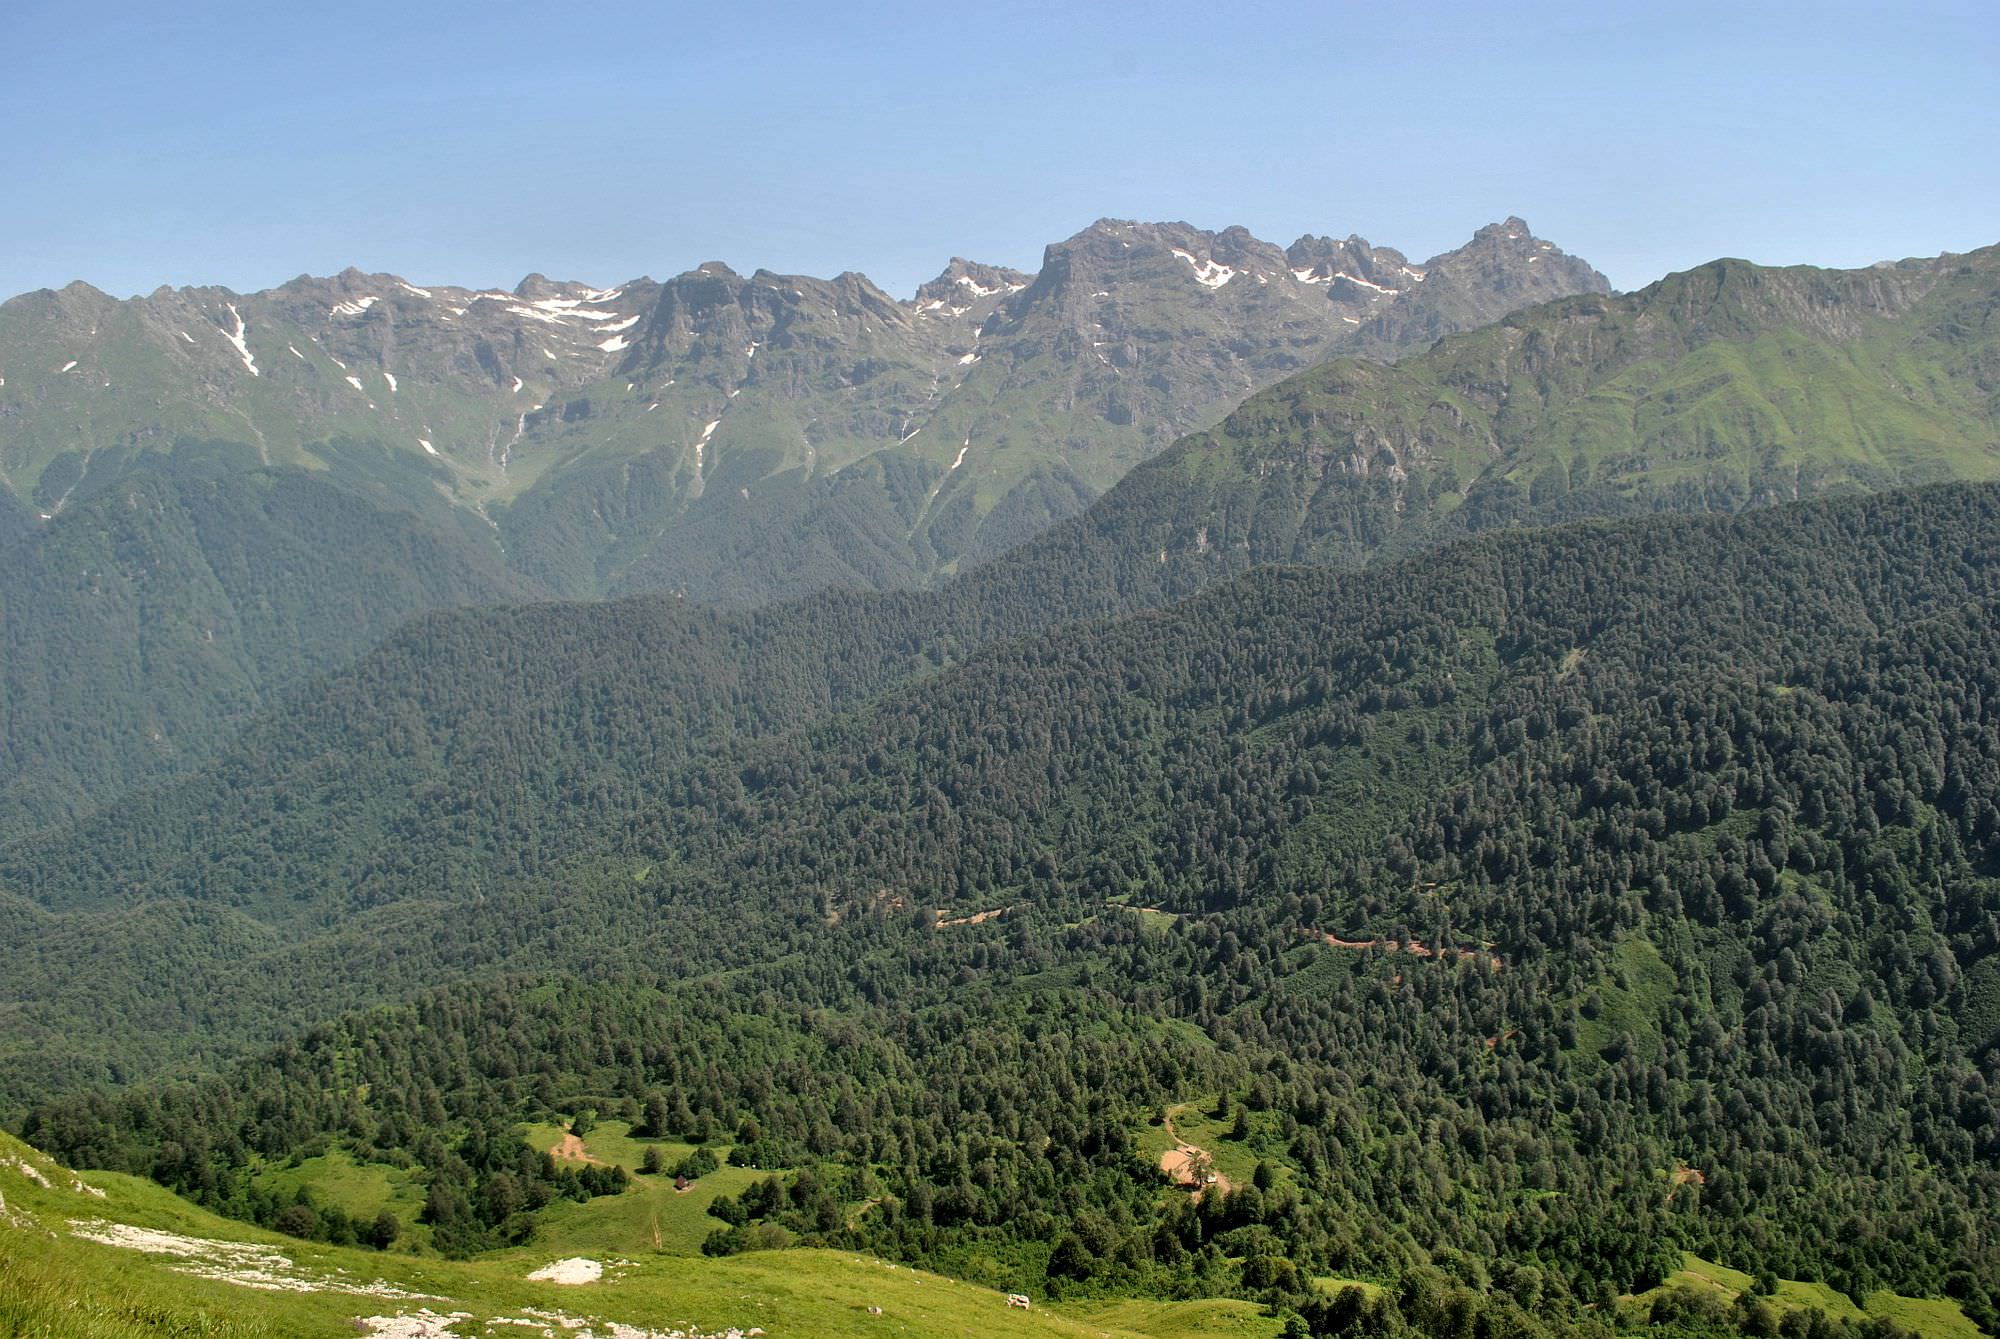 Egrisi mountains in the distance